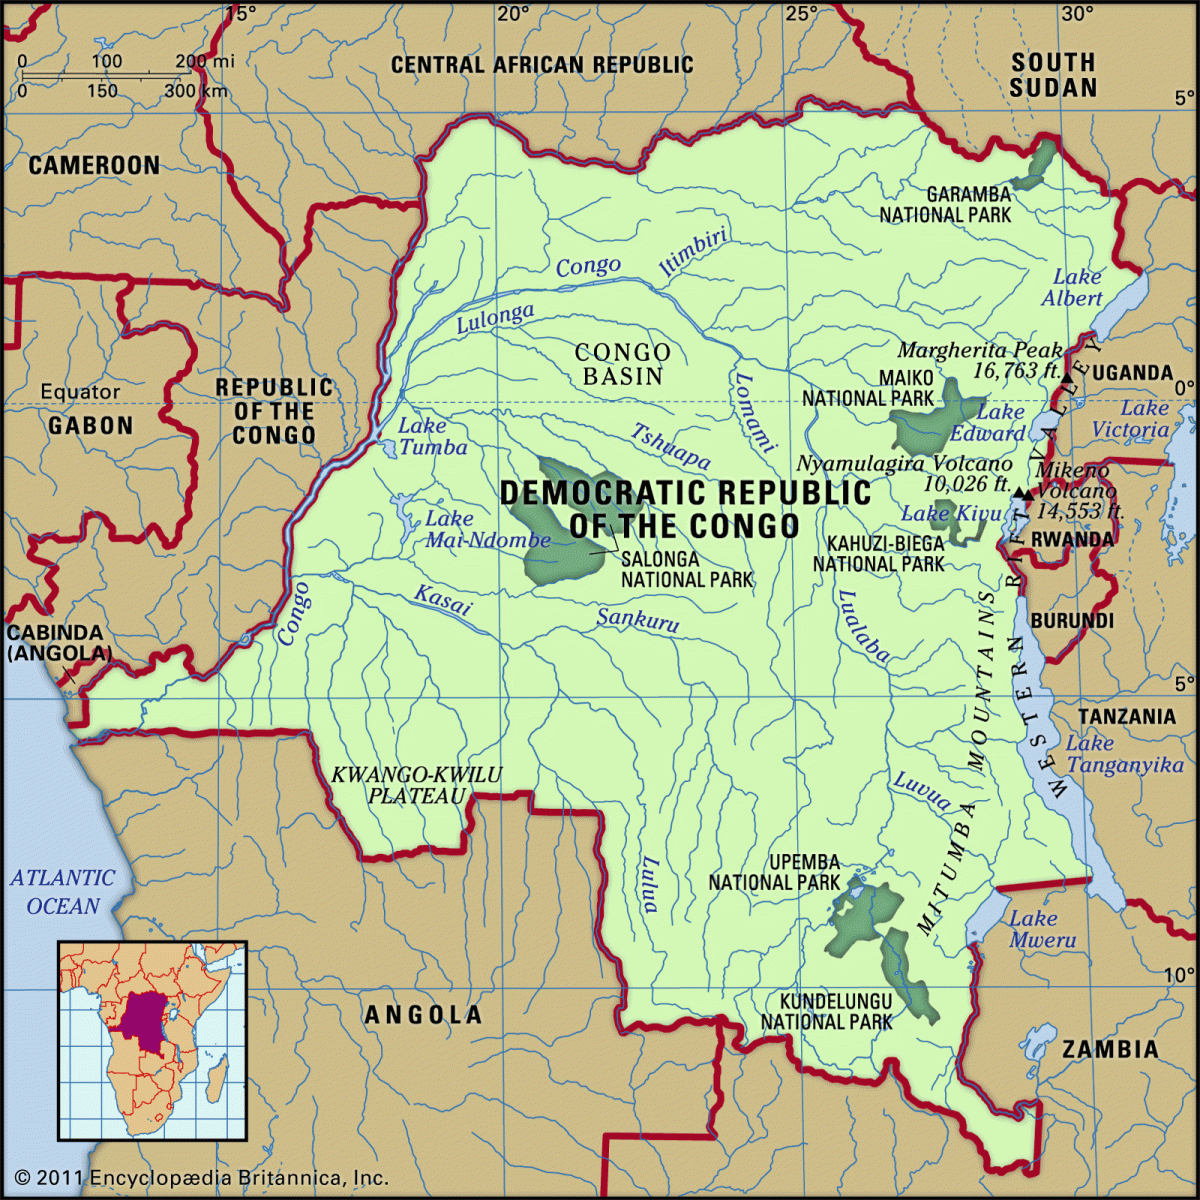 The Ongoing Crisis in The Democratic Republic of Congo